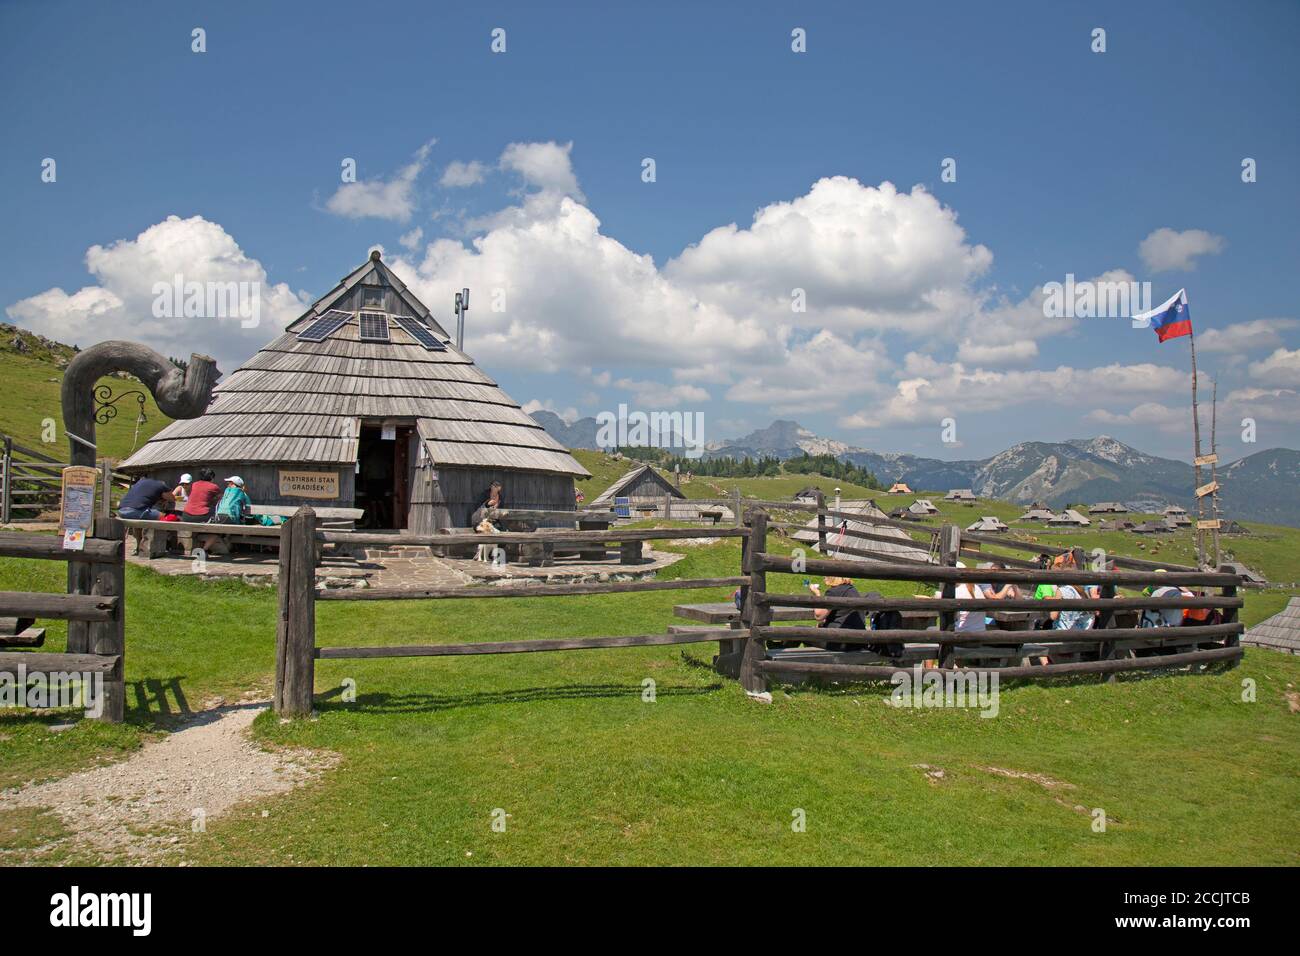 A traditional herdsman hut now being used as a cafe restaurant in the mountain settlement village of Velika Planina in Slovenia. Stock Photo